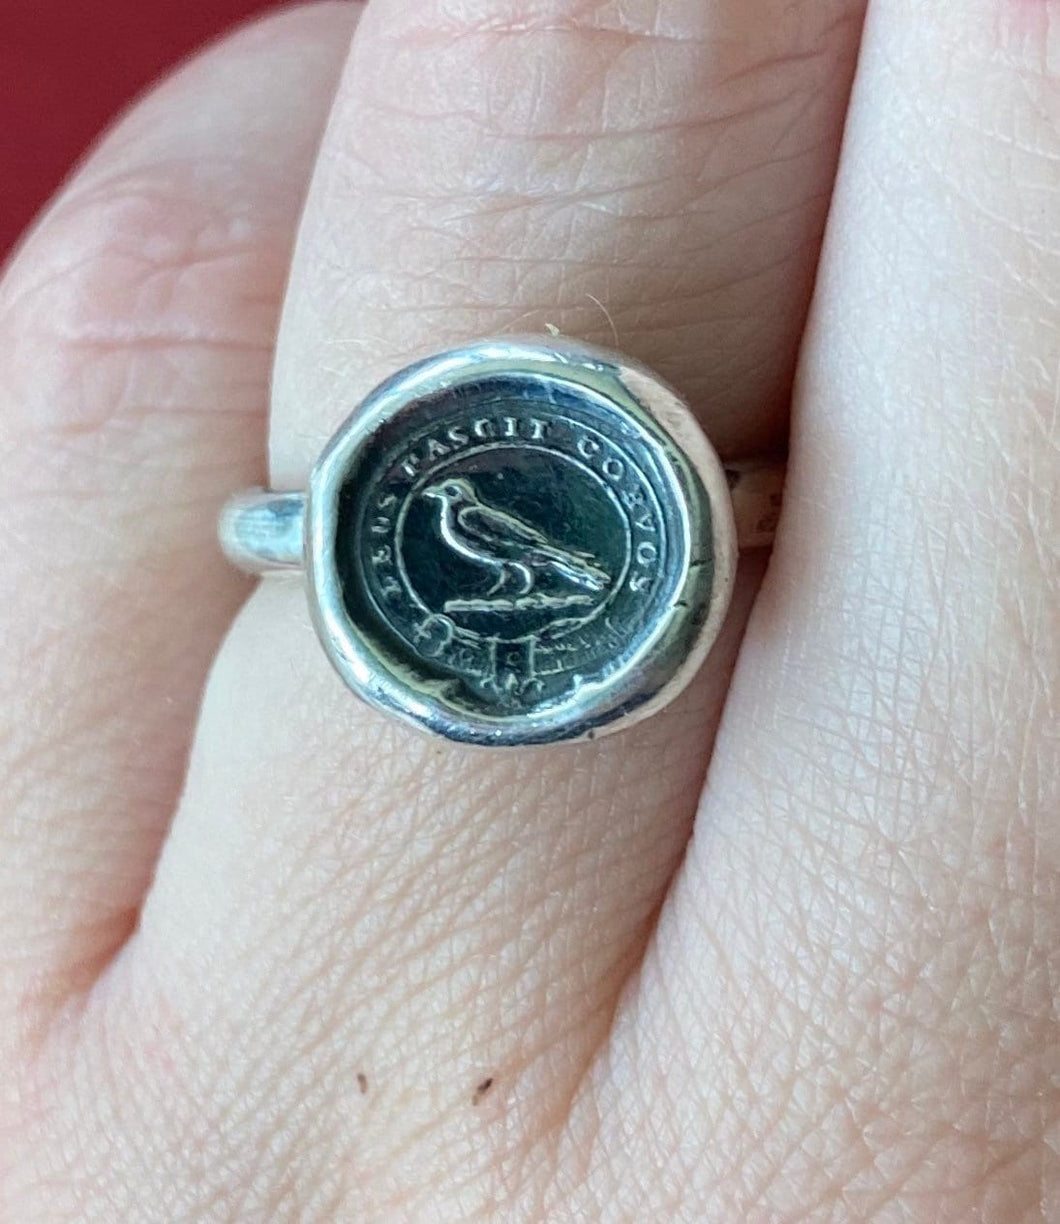 God feeds the ravens ring, choose your size.  Made to order.  Solid sterling silver.